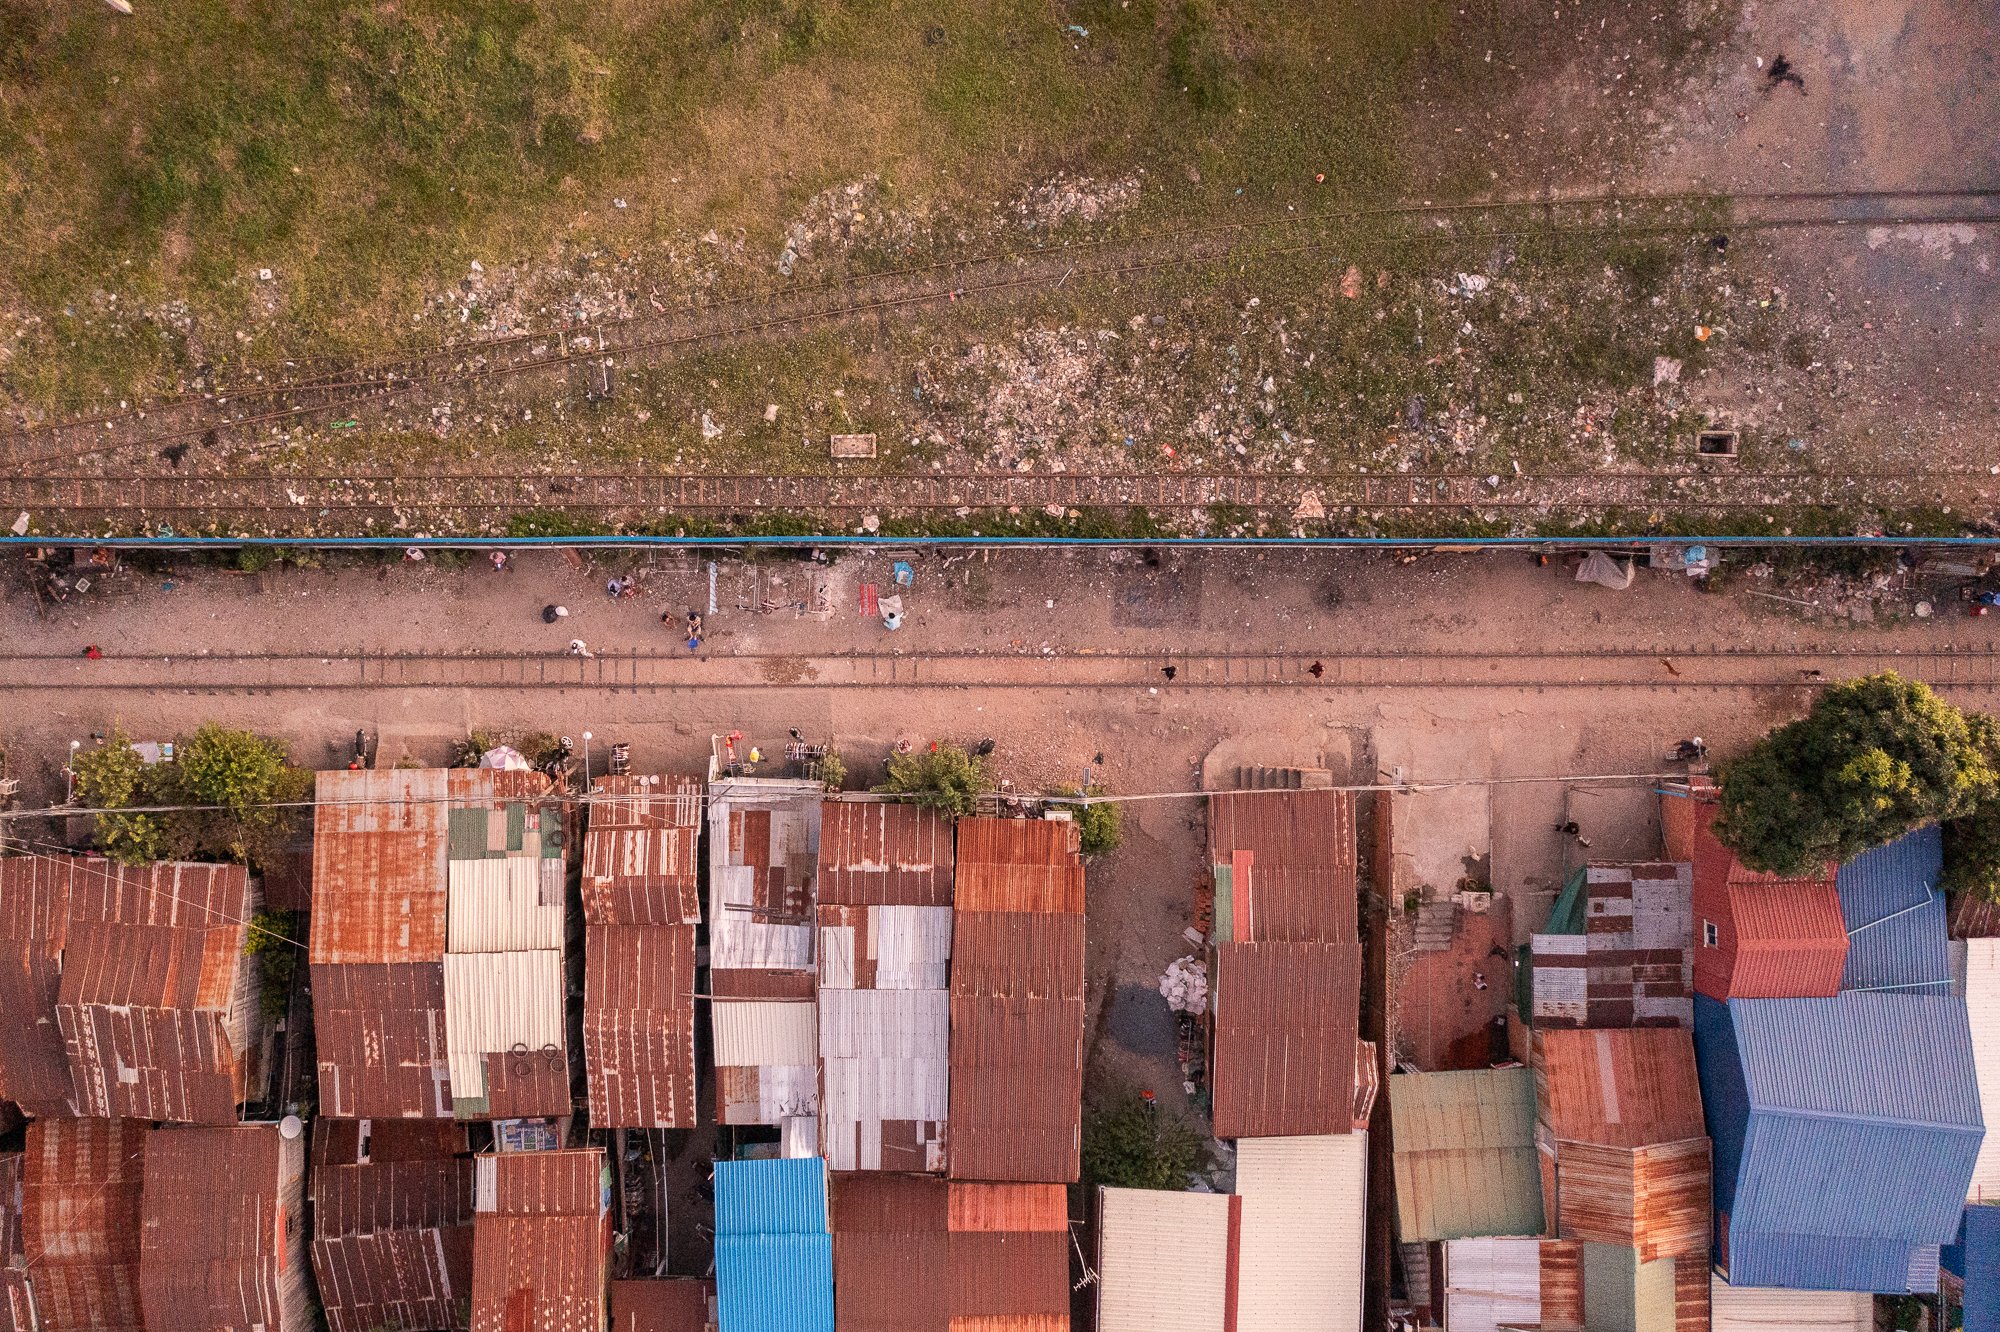 A top down view of the rail tracks with metal shacks lining the route, Phnom Penh, Cambodia